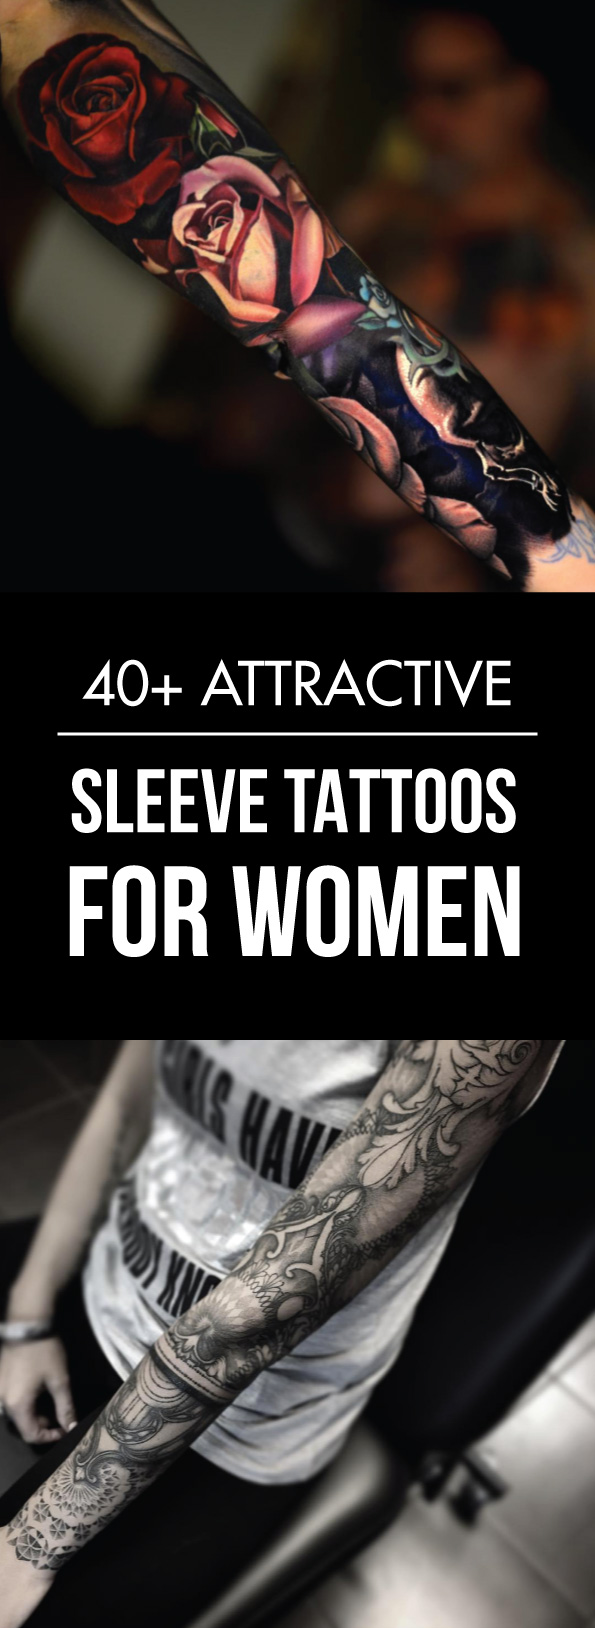 40+ Attractive Sleeve Tattoos for Women